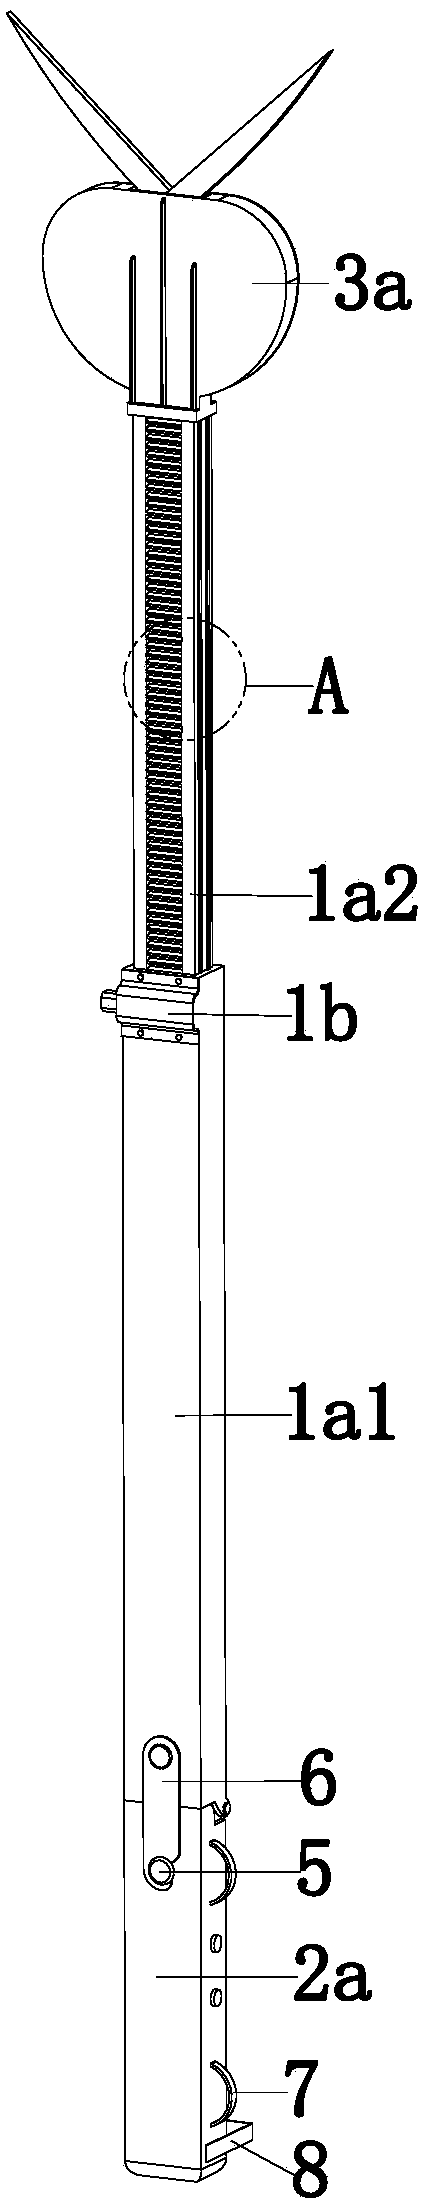 Device for trimming branches in garden